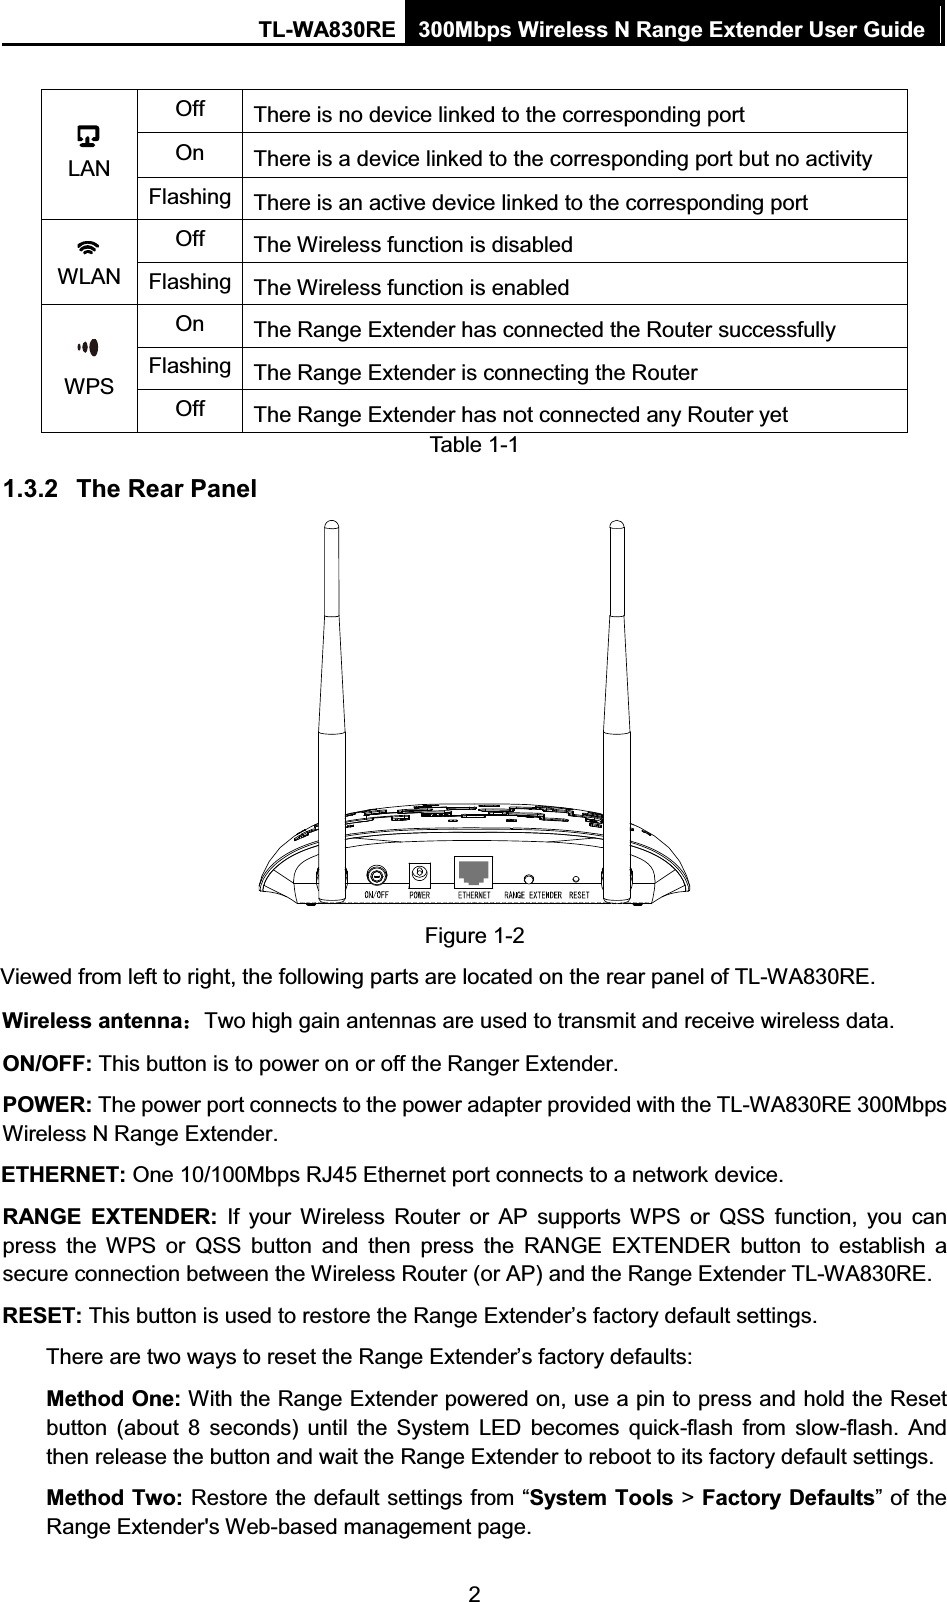 TL-WA830RE  300Mbps Wireless N Range Extender User Guide  2  LAN Off  There is no device linked to the corresponding port On  There is a device linked to the corresponding port but no activity Flashing  There is an active device linked to the corresponding port  WLAN Off  The Wireless function is disabled Flashing  The Wireless function is enabled  WPS On  The Range Extender has connected the Router successfully Flashing  The Range Extender is connecting the Router   Off  The Range Extender has not connected any Router yet Table 1-1 1.3.2 The Rear Panel  Figure 1-2 Viewed from left to right, the following parts are located on the rear panel of TL-WA830RE. Wireless antenna˖˖Two high gain antennas are used to transmit and receive wireless data.   ON/OFF: This button is to power on or off the Ranger Extender. POWER: The power port connects to the power adapter provided with the TL-WA830RE 300Mbps Wireless N Range Extender. ETHERNET: One 10/100Mbps RJ45 Ethernet port connects to a network device. RANGE EXTENDER: If your Wireless Router or AP supports WPS or QSS function, you can press the WPS or QSS button and then press the RANGE EXTENDER button to establish a secure connection between the Wireless Router (or AP) and the Range Extender TL-WA830RE. RESET: This button is used to restore the Range Extender’s factory default settings.   There are two ways to reset the Range Extender’s factory defaults:   Method One: With the Range Extender powered on, use a pin to press and hold the Reset button (about 8 seconds) until the System LED becomes quick-flash from slow-flash. And then release the button and wait the Range Extender to reboot to its factory default settings.   Method Two: Restore the default settings from “System Tools &gt; Factory Defaults” of the Range Extender&apos;s Web-based management page. 